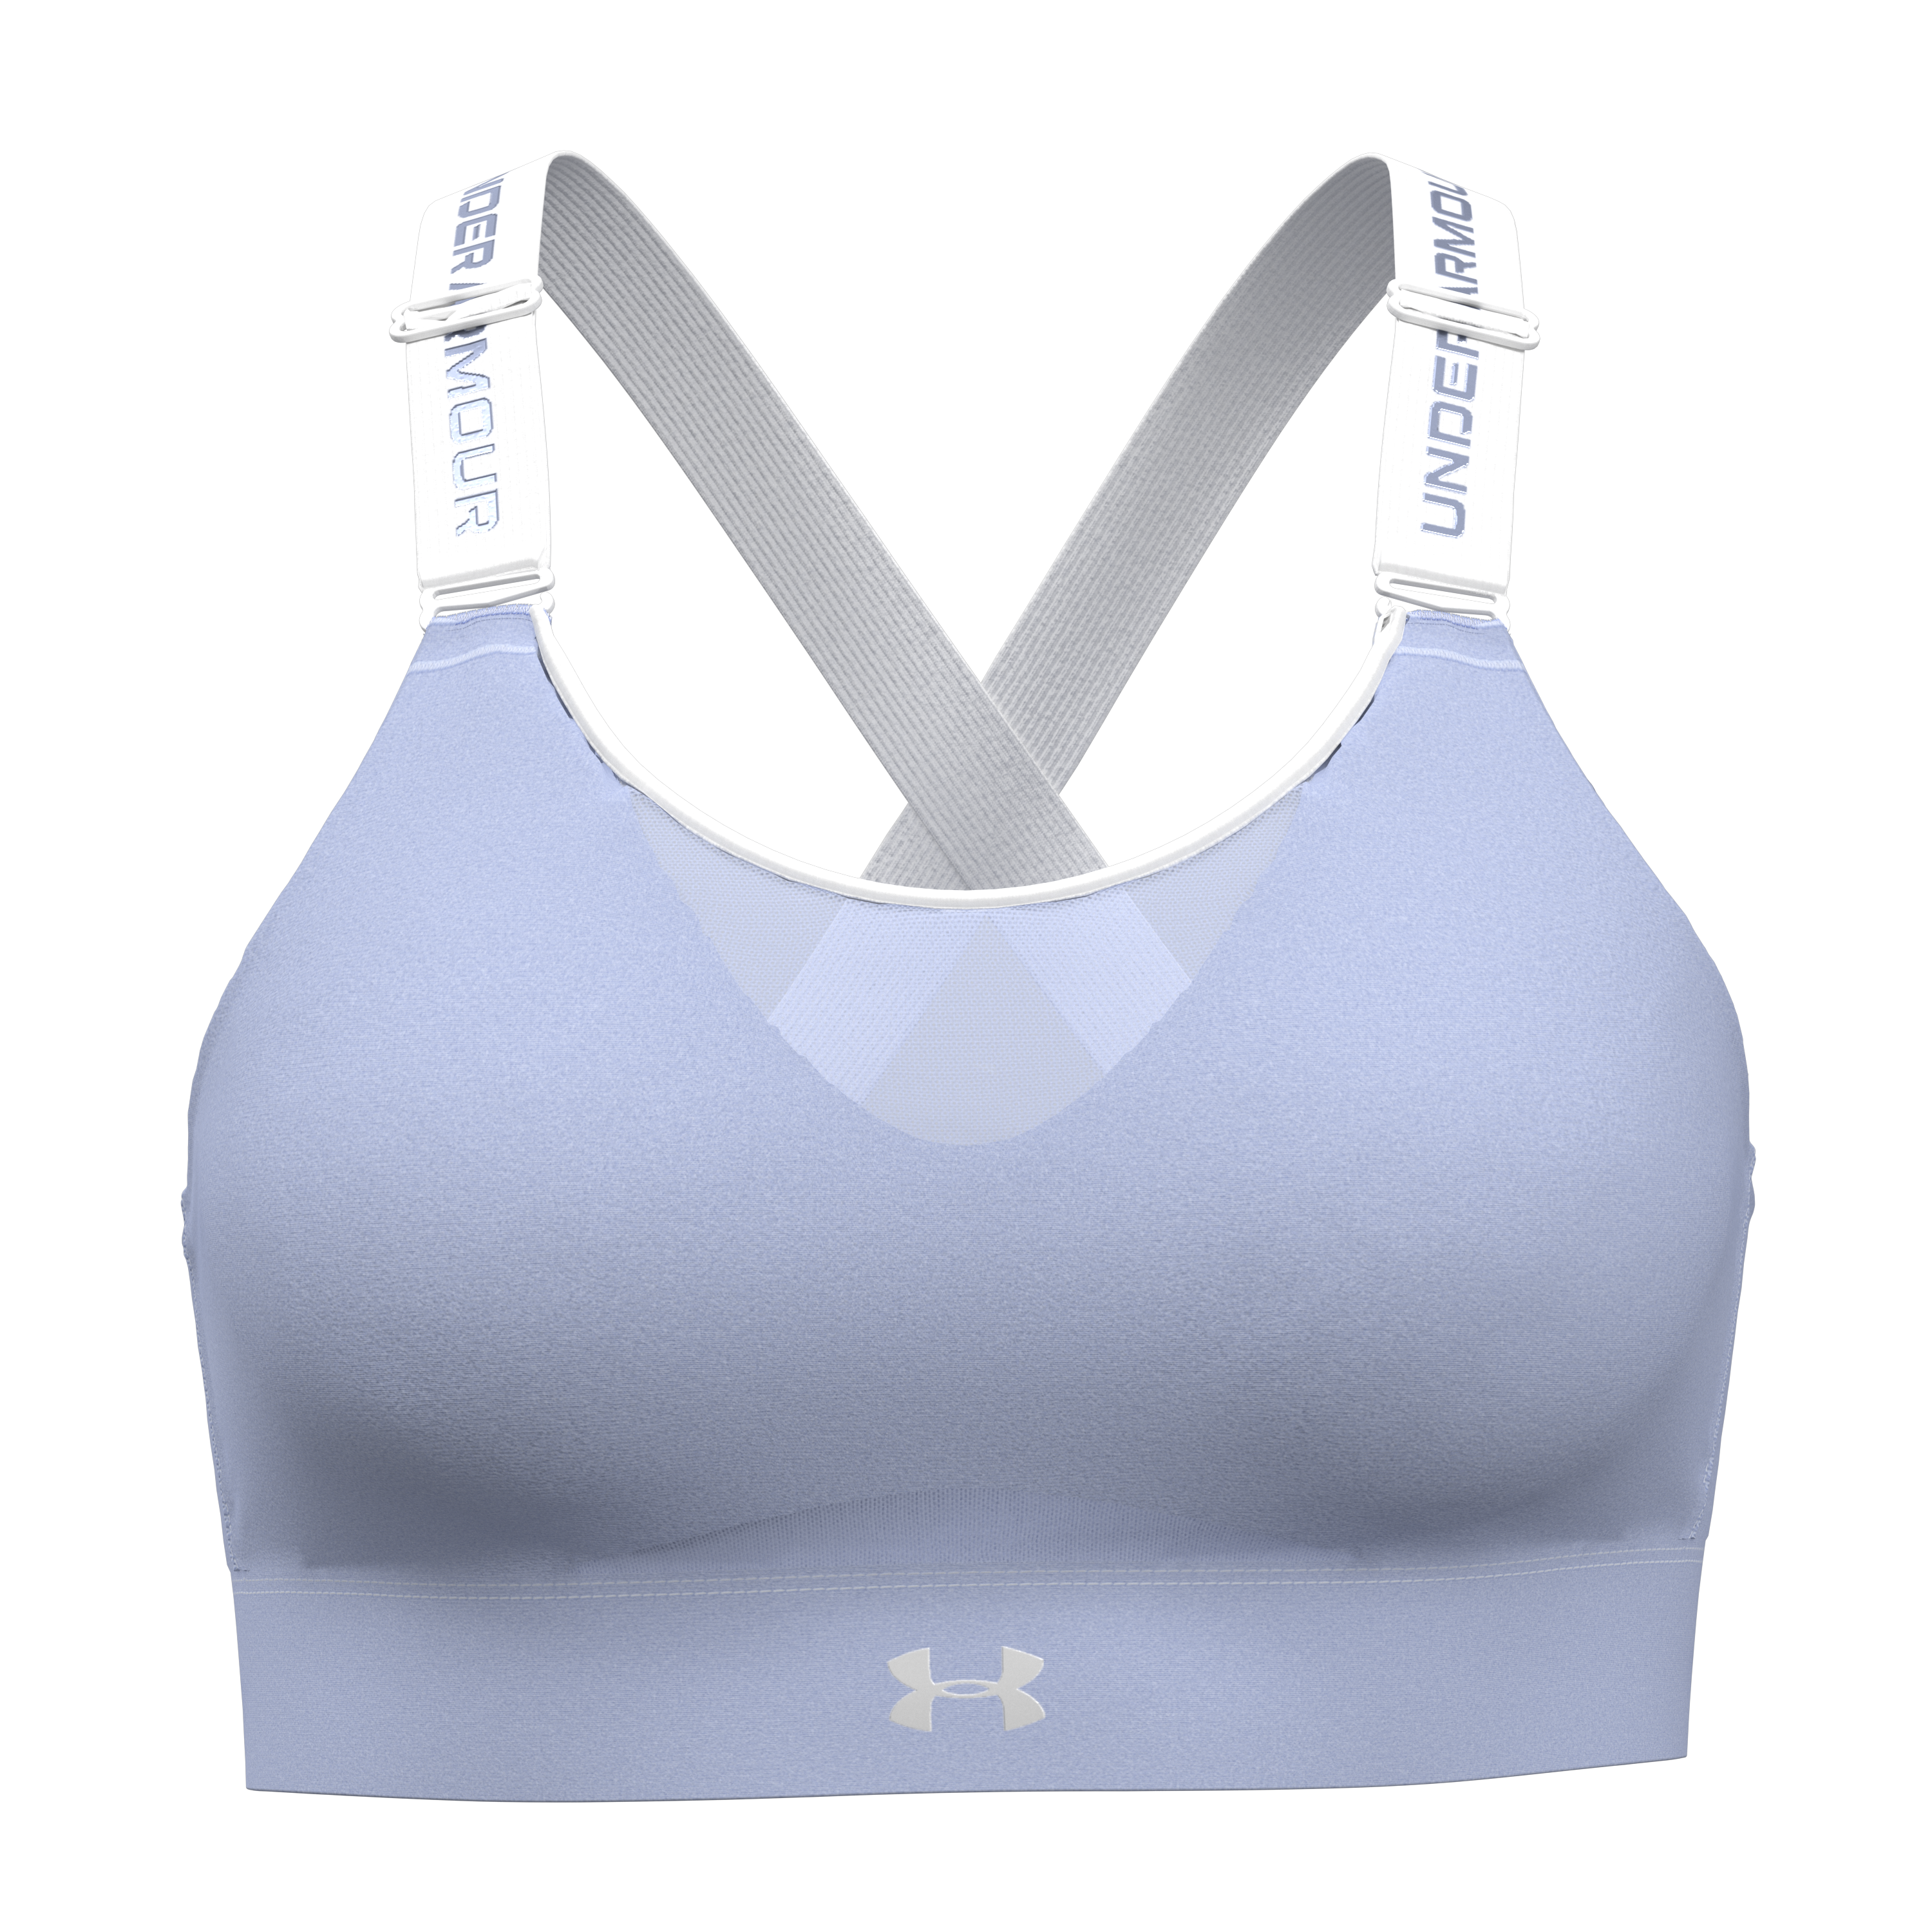 Abercrombie & Fitch medium support sports bra in daisy print - ShopStyle